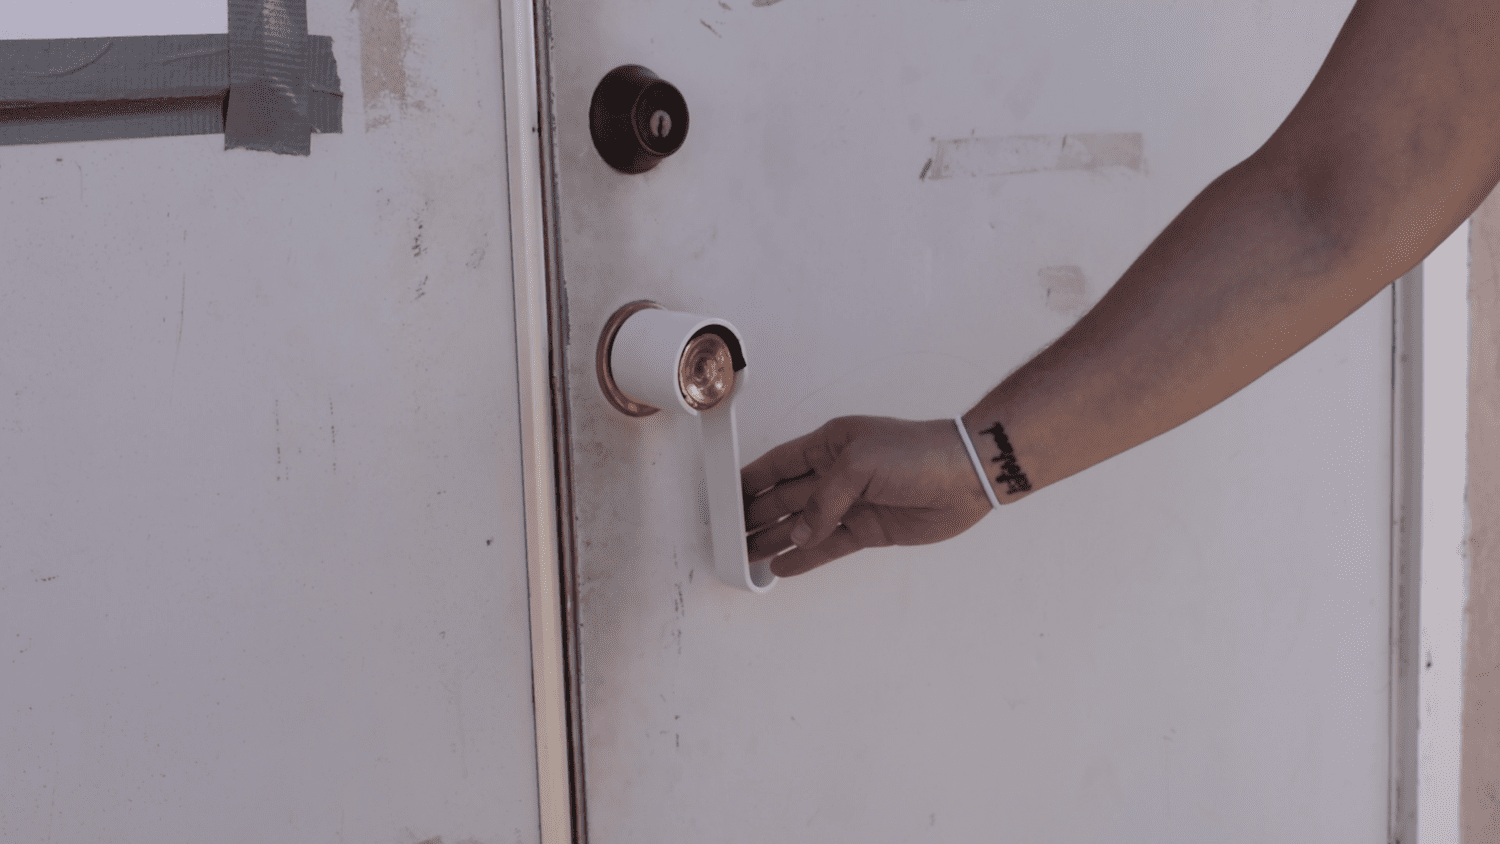 Round doorknob is outfitted with a retrofitted lever knob.